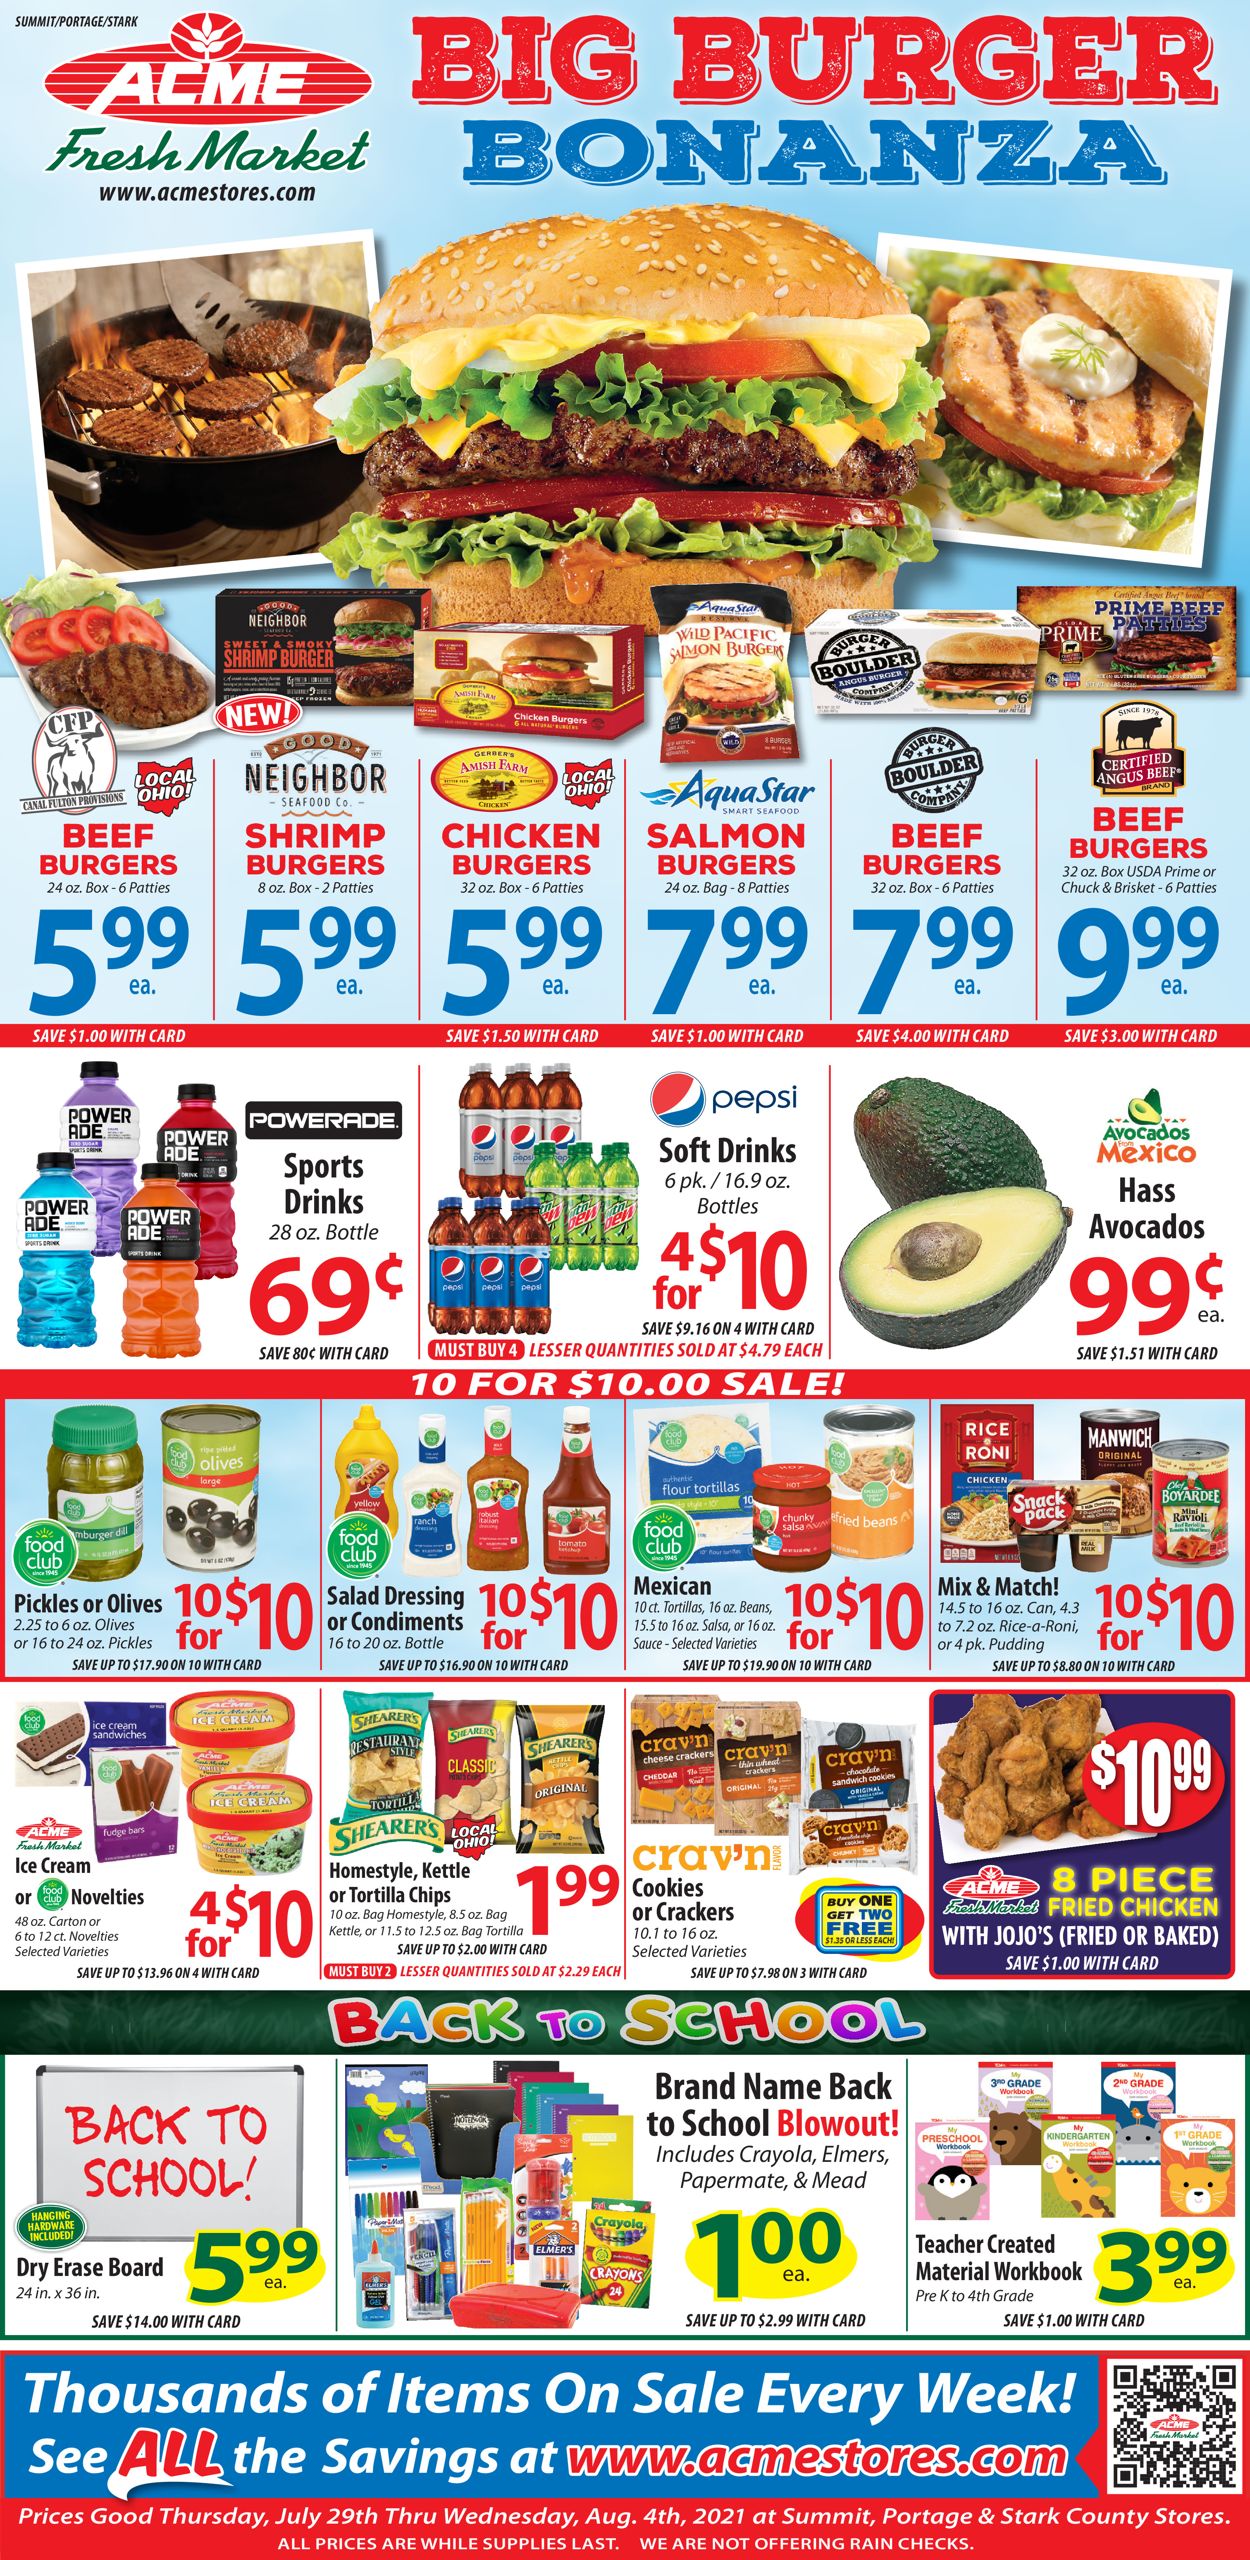 Acme Fresh Market Current weekly ad 07/29 - 08/04/2021 - frequent-ads.com